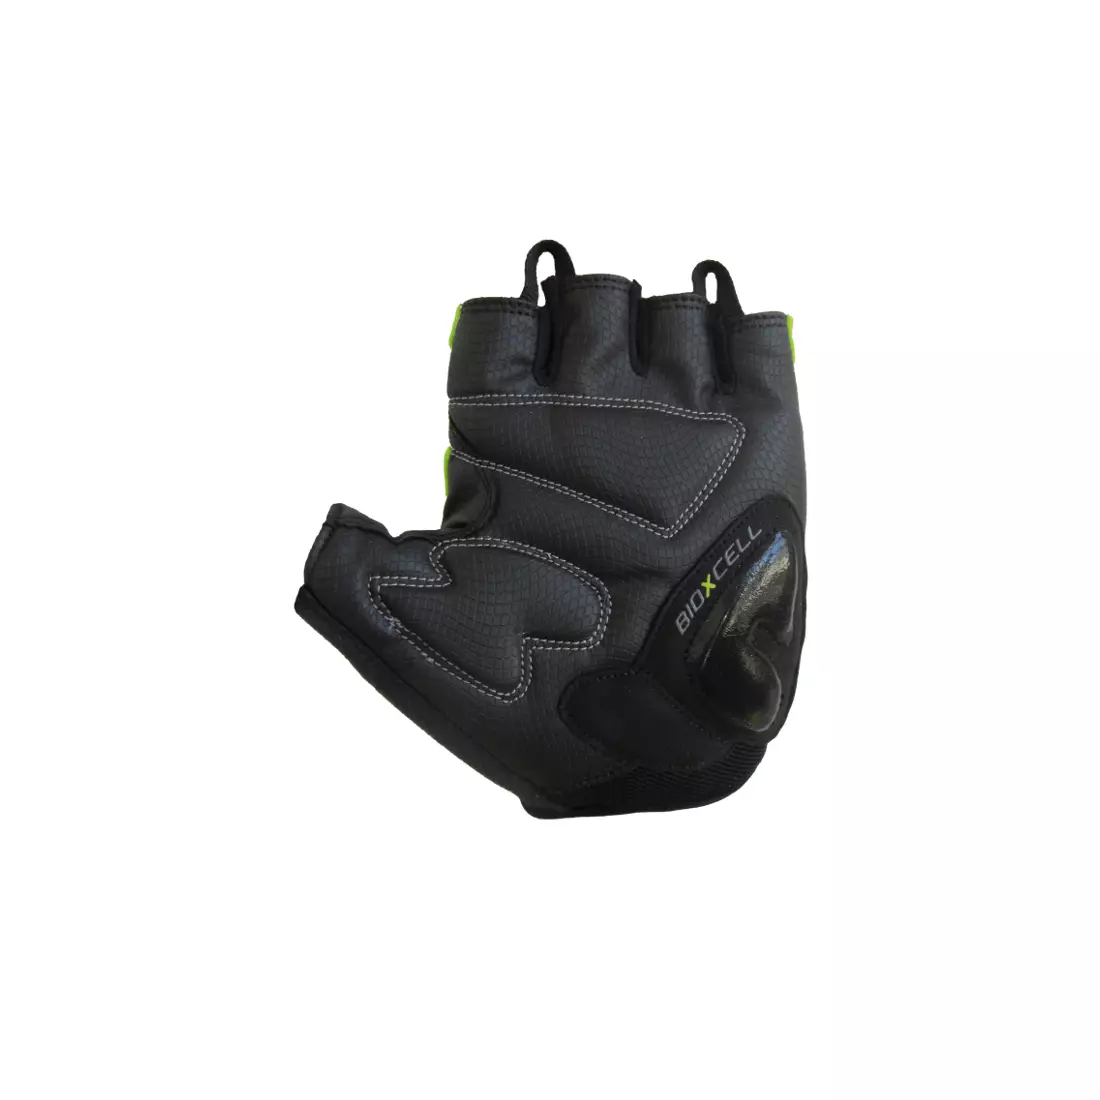 CHIBA BIOXCELL cycling gloves, white and green 30617